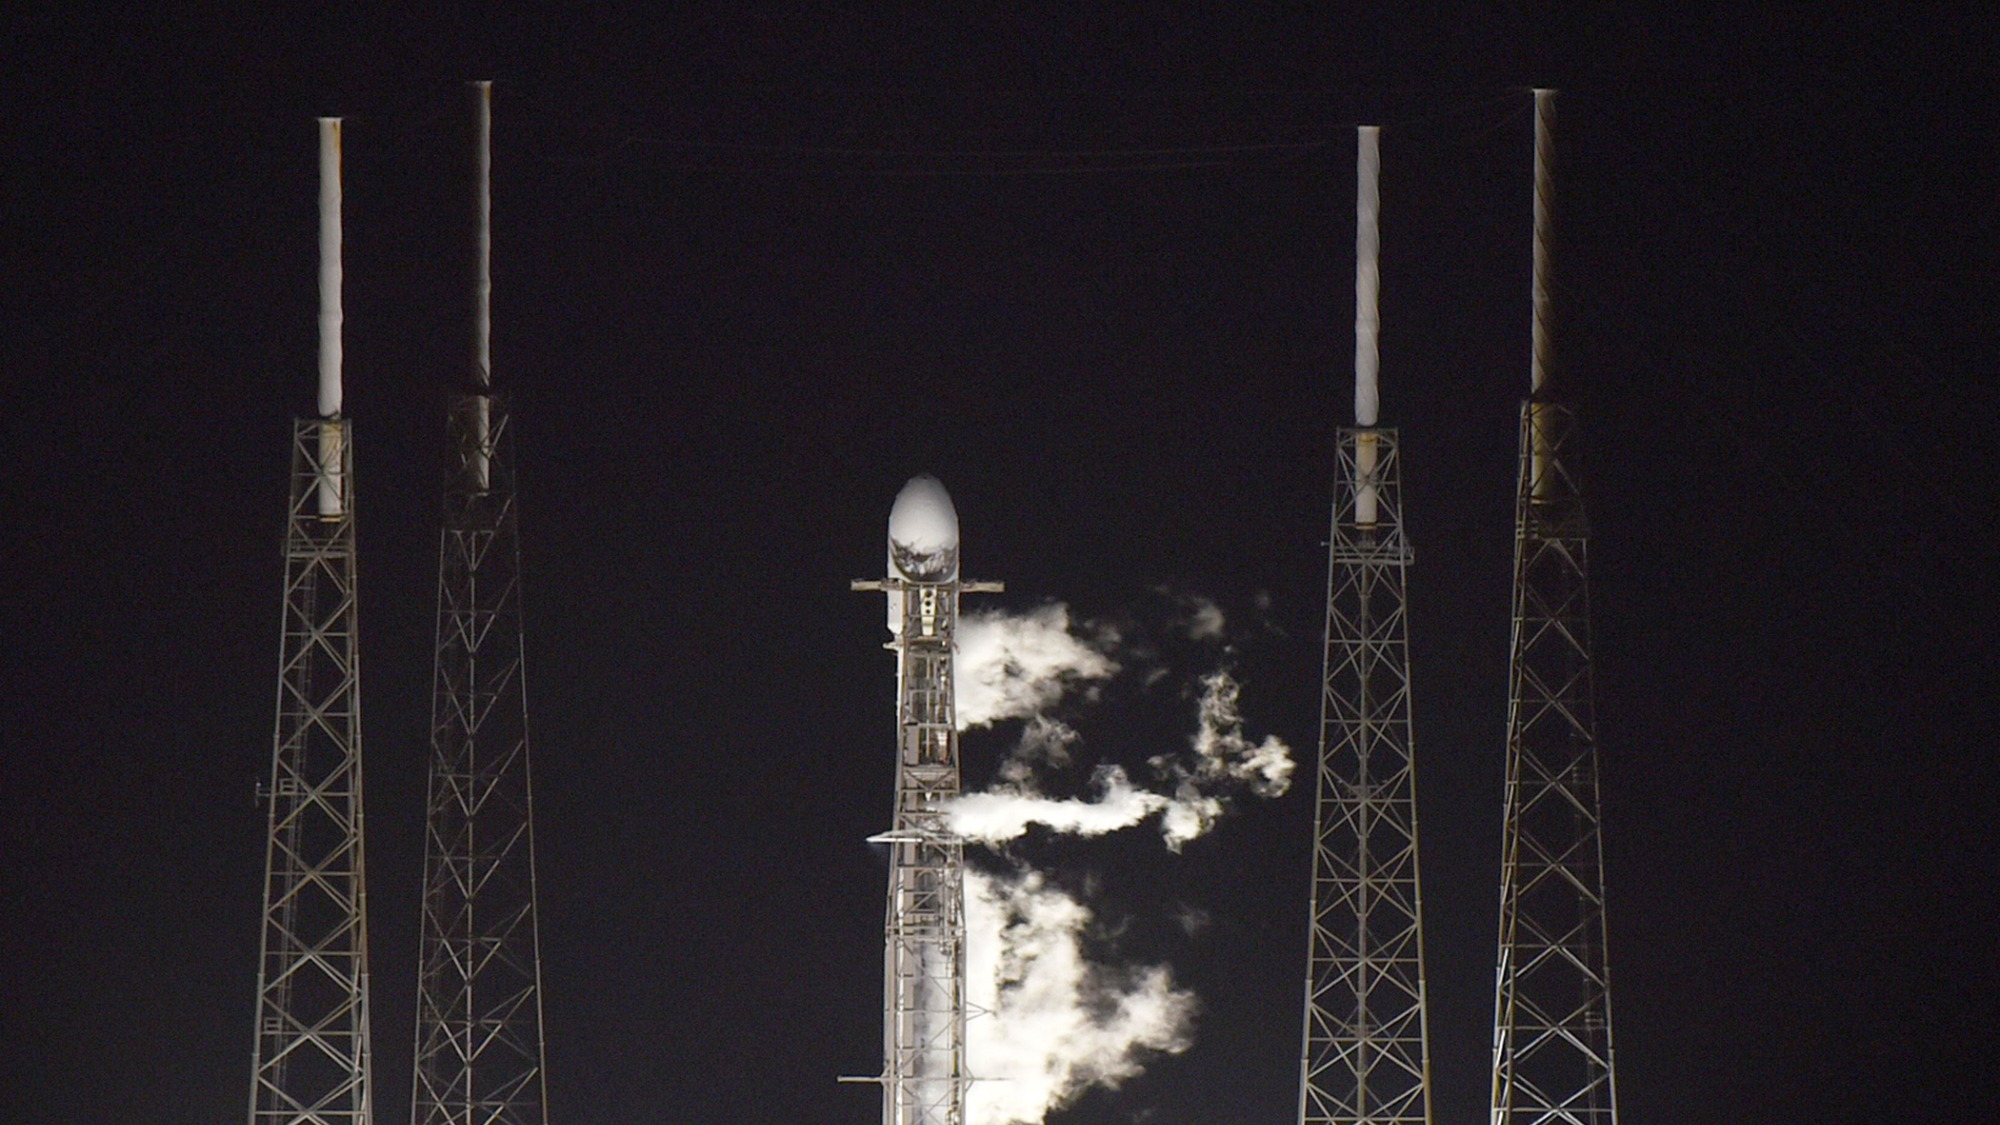 SpaceX Falcon 9 rocket readying for launch at night